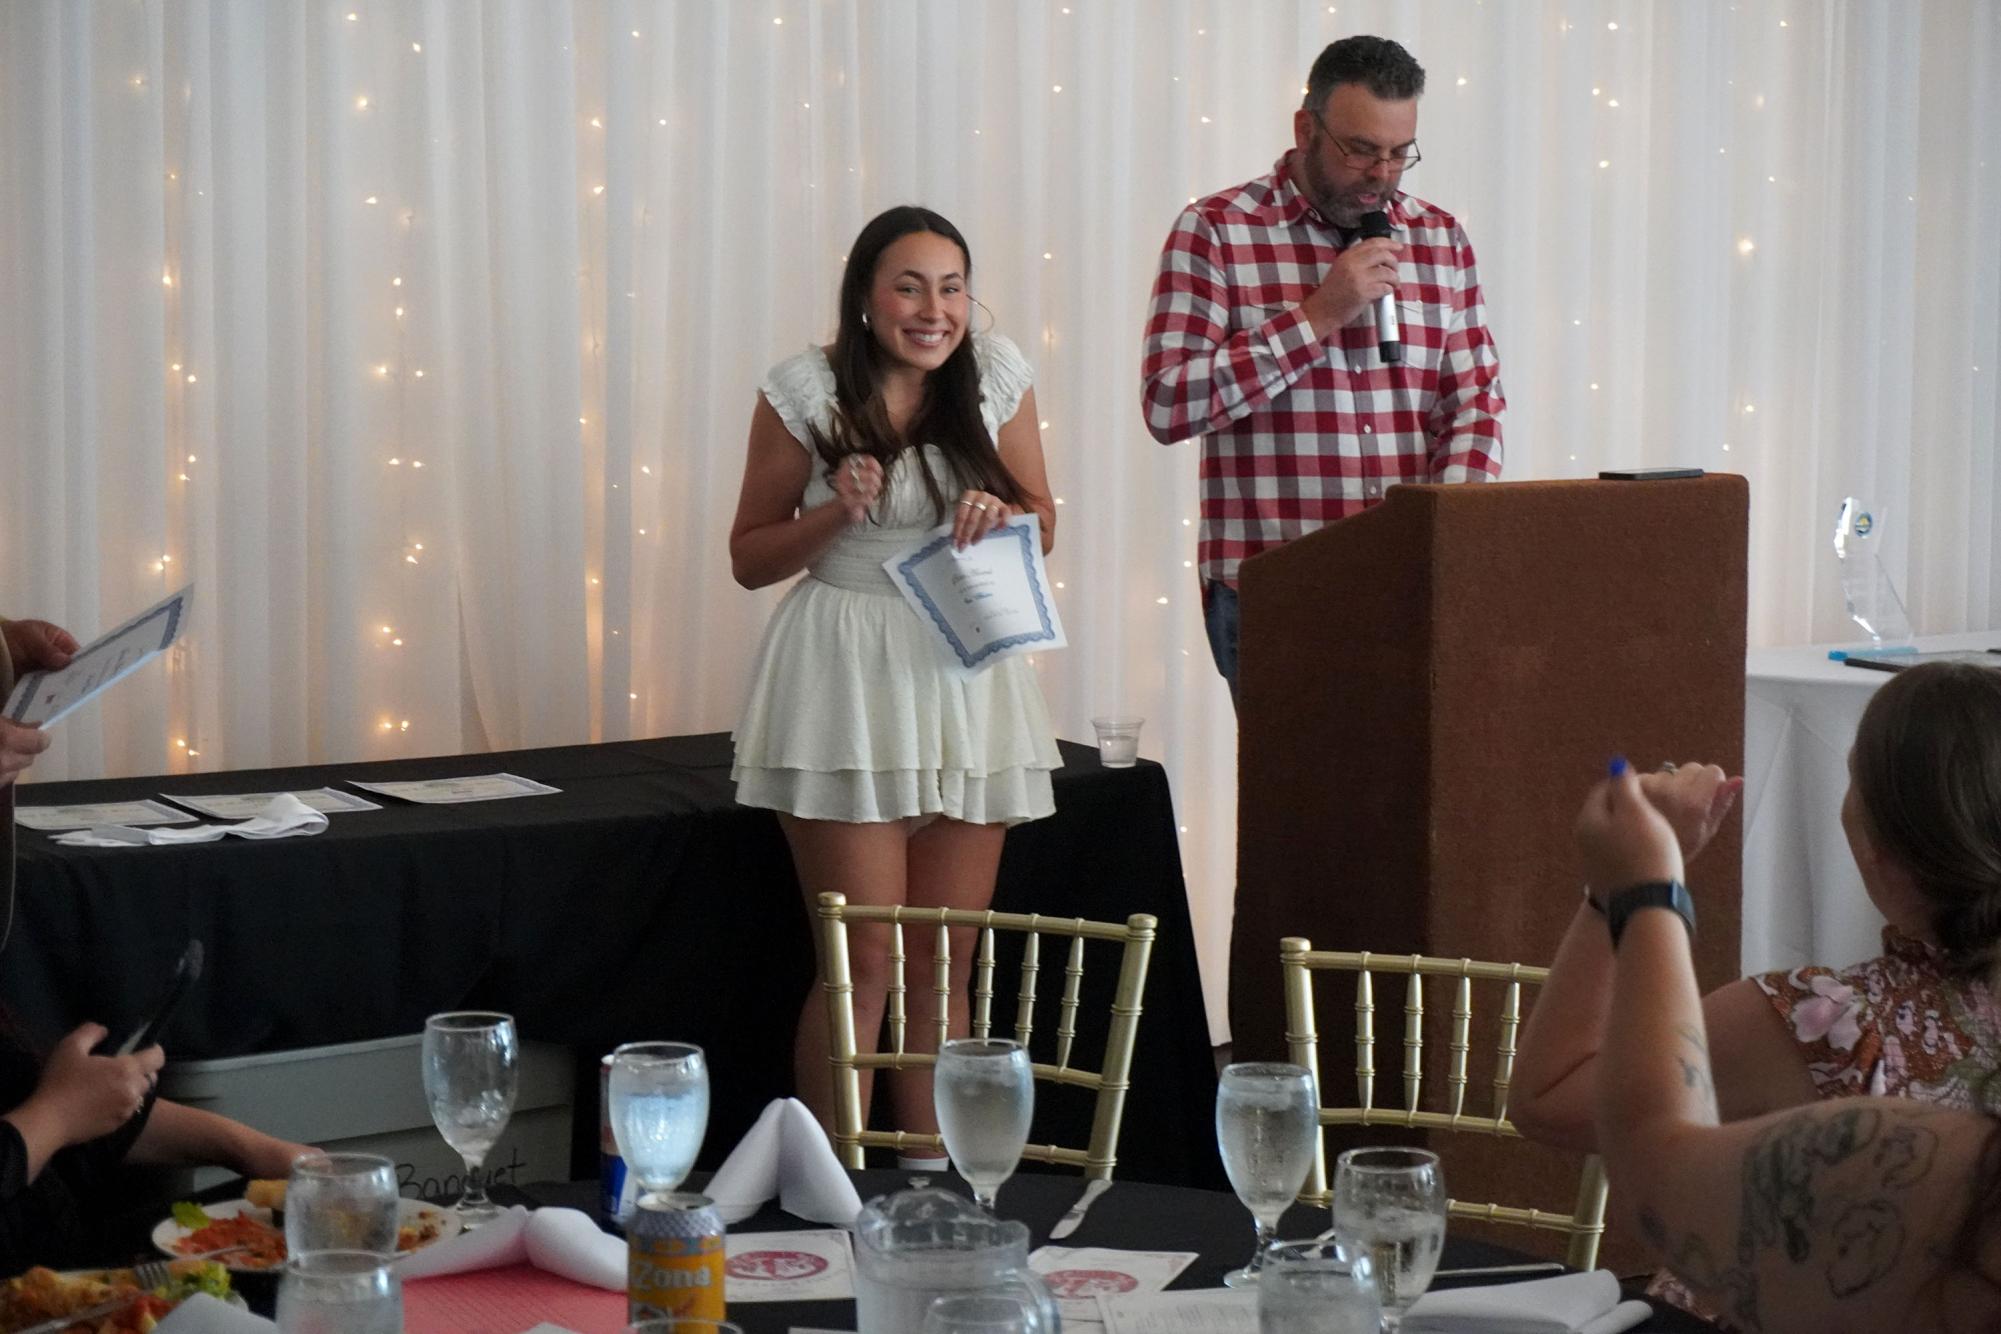 San Diego City College women’s volleyball player Josephine “Phina” Bustos, left, reacts to receiving the James Swinson Scholar-Athlete Award from Dean Aaron Detty, right, at the Knights Awards Dinner at the Marina Village Conference Center, Thursday, May 16, 2024. Phina will complete 75 academic units and has a 4.00 GPA. Photo by Vince Outlaw/City Times Media